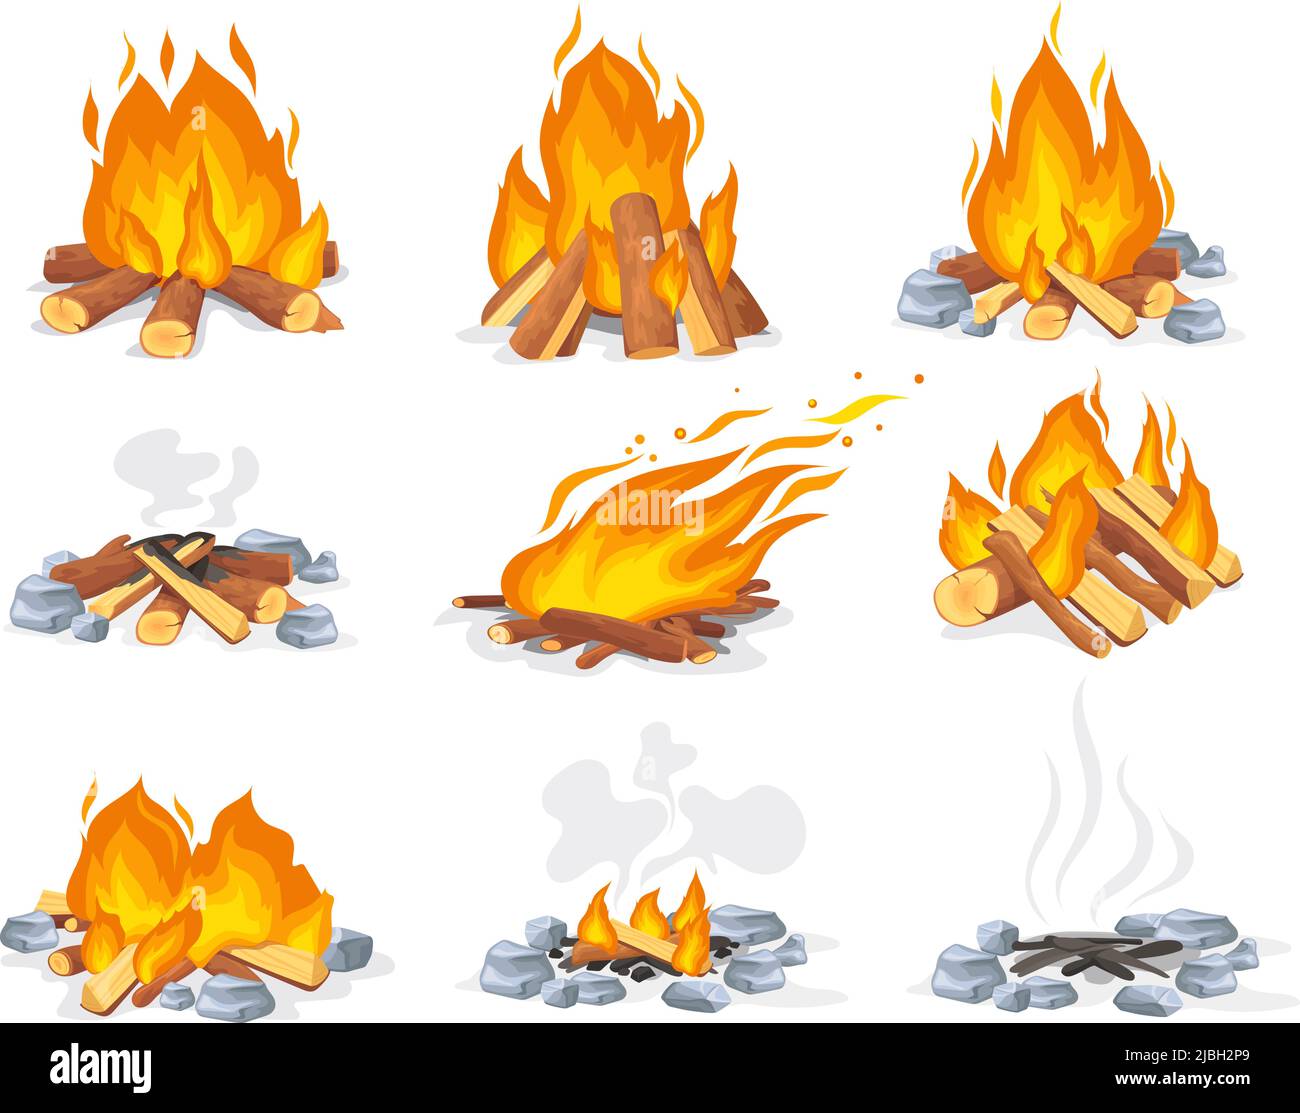 Burning and extinct bonfire. Forest heating bondfire, fireplace burn logs autumn cartoon campfire flammable firewoods wooden outdoor fire combustion, set vector illustration of firewood and campfire Stock Vector